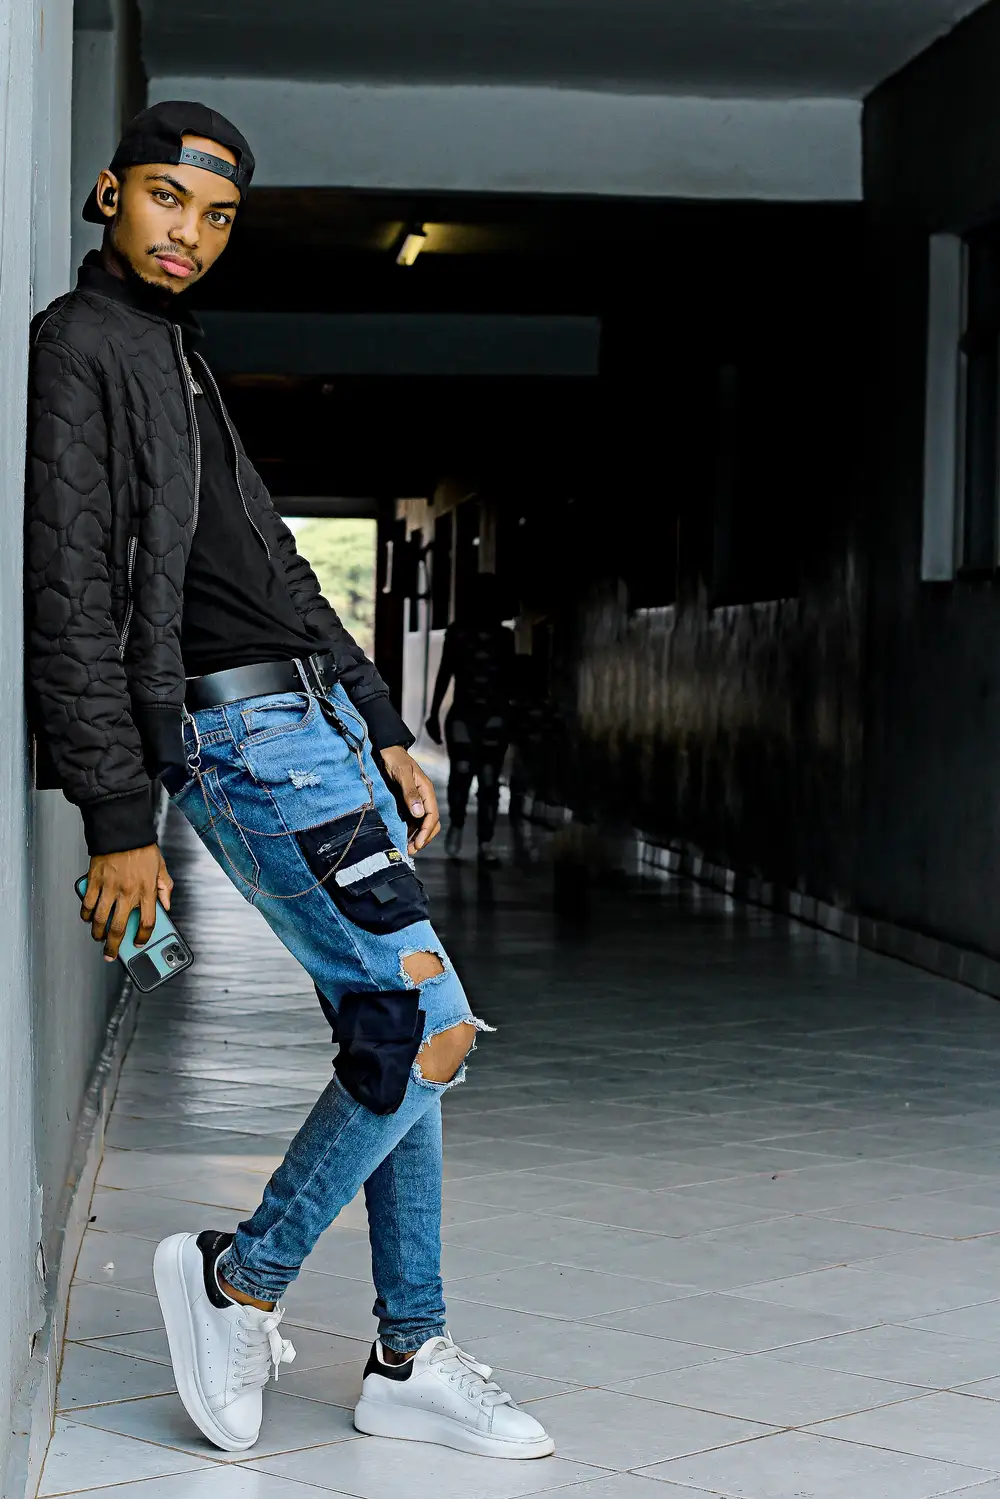 Young boy with ripped jeans and face cap posing with the wall on a walkway